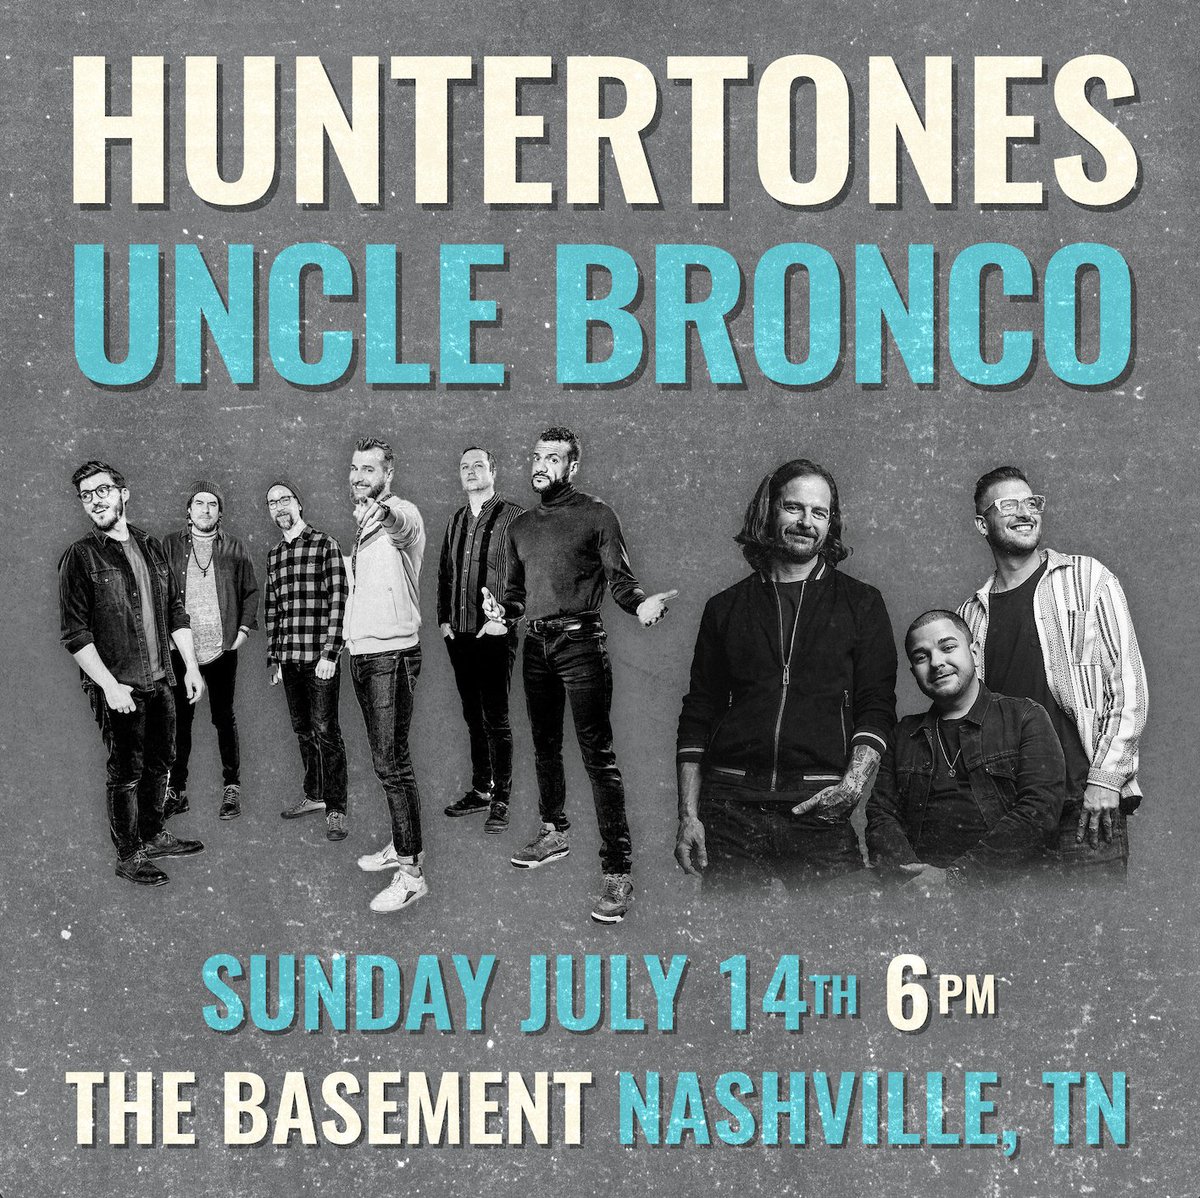 JUST ANNOUNCED!! @huntertonesband w/ @unclebronco_music will be in the house on JULY 14th. Tickets are on sale RIGHT NOW 🏃: thebasementnashville.com